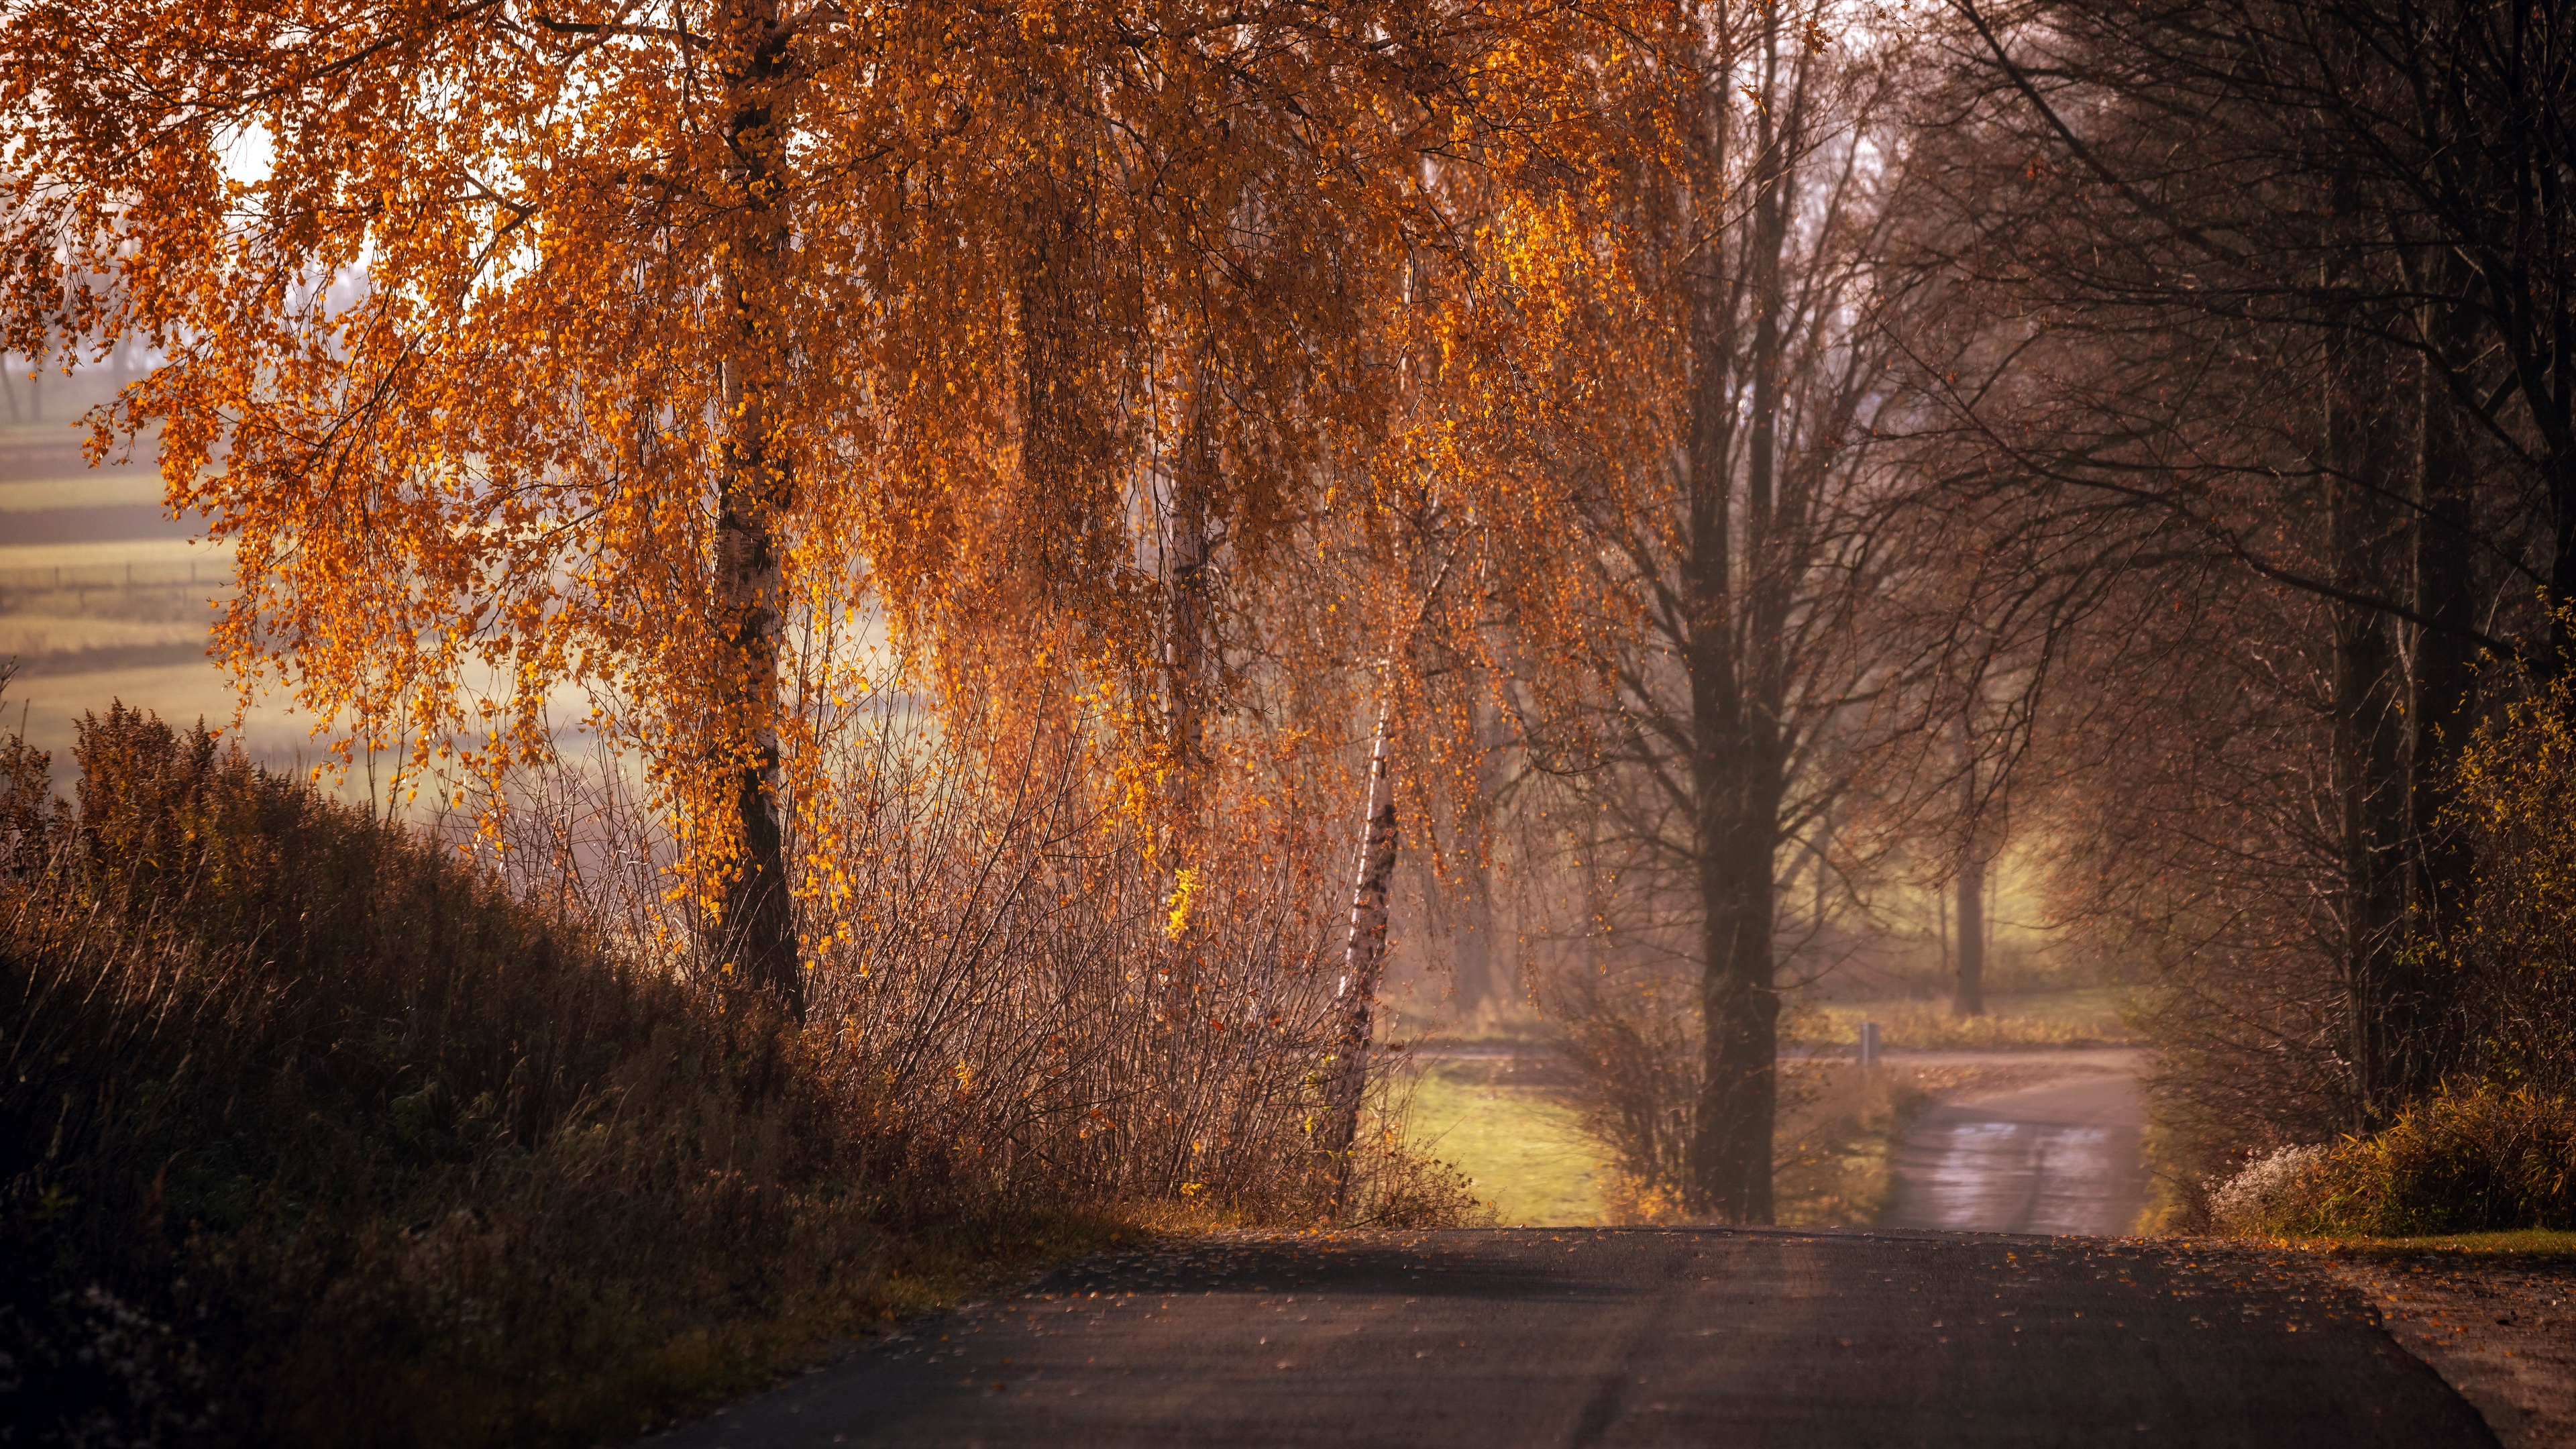 General 3840x2160 fall outdoors trees road